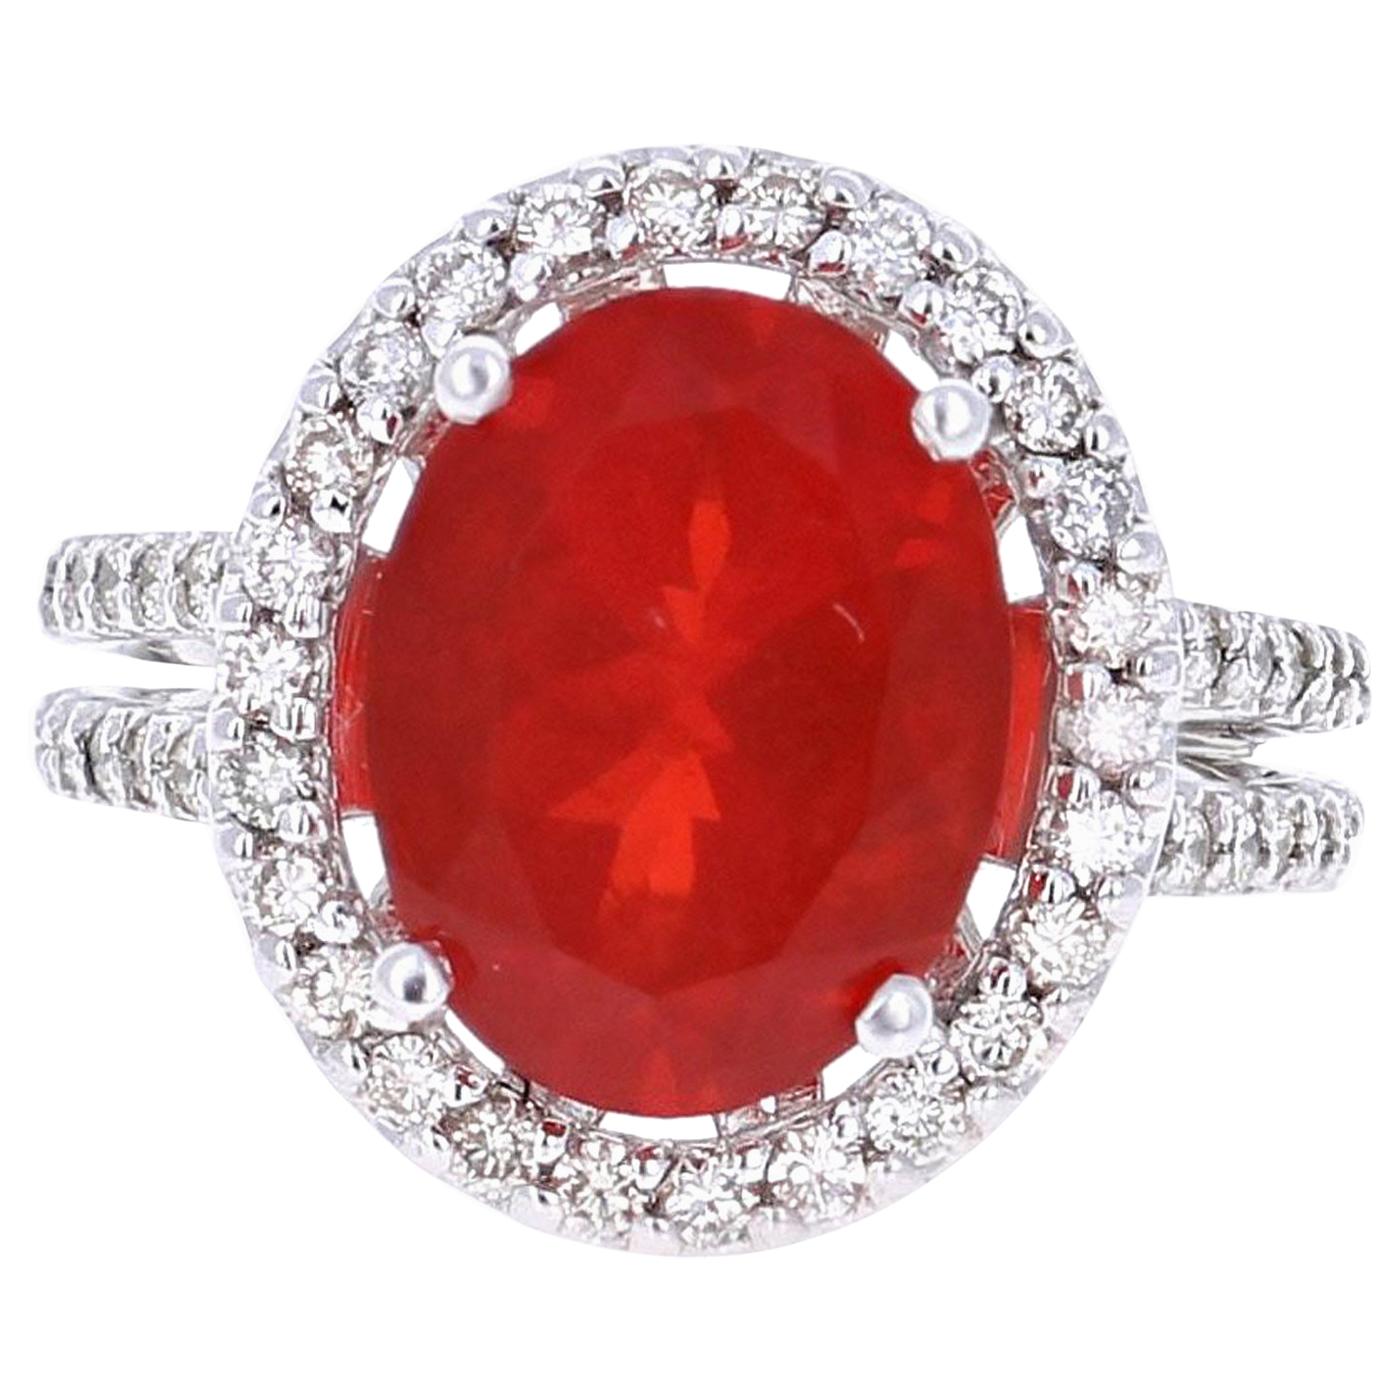 4.75 Carat Fire Opal Diamond Cocktail White Gold Ring